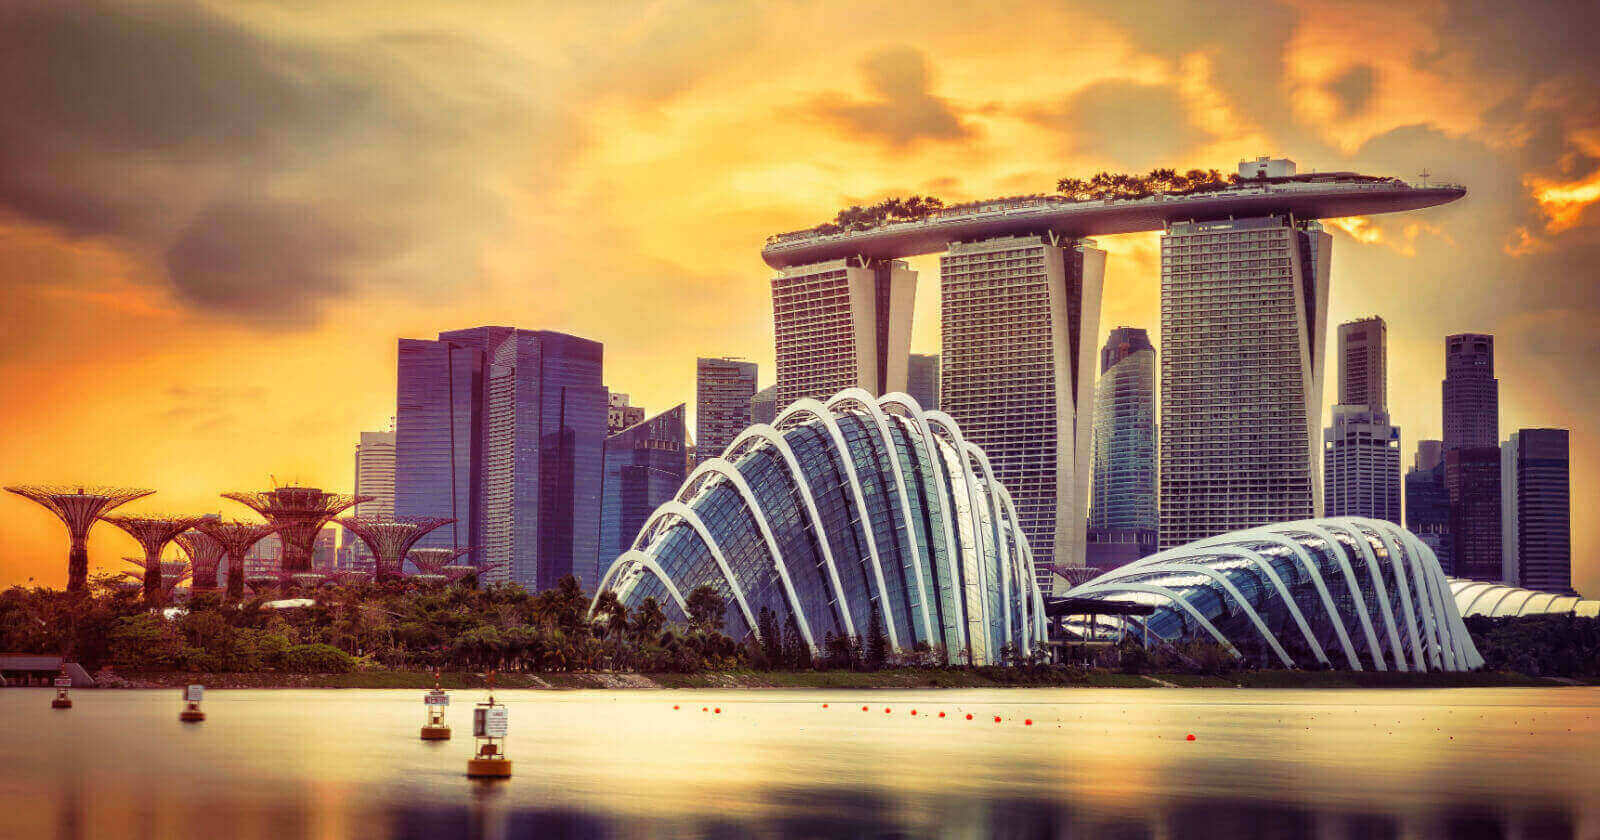 Gardens by the Bay in Singapore: All you need to know